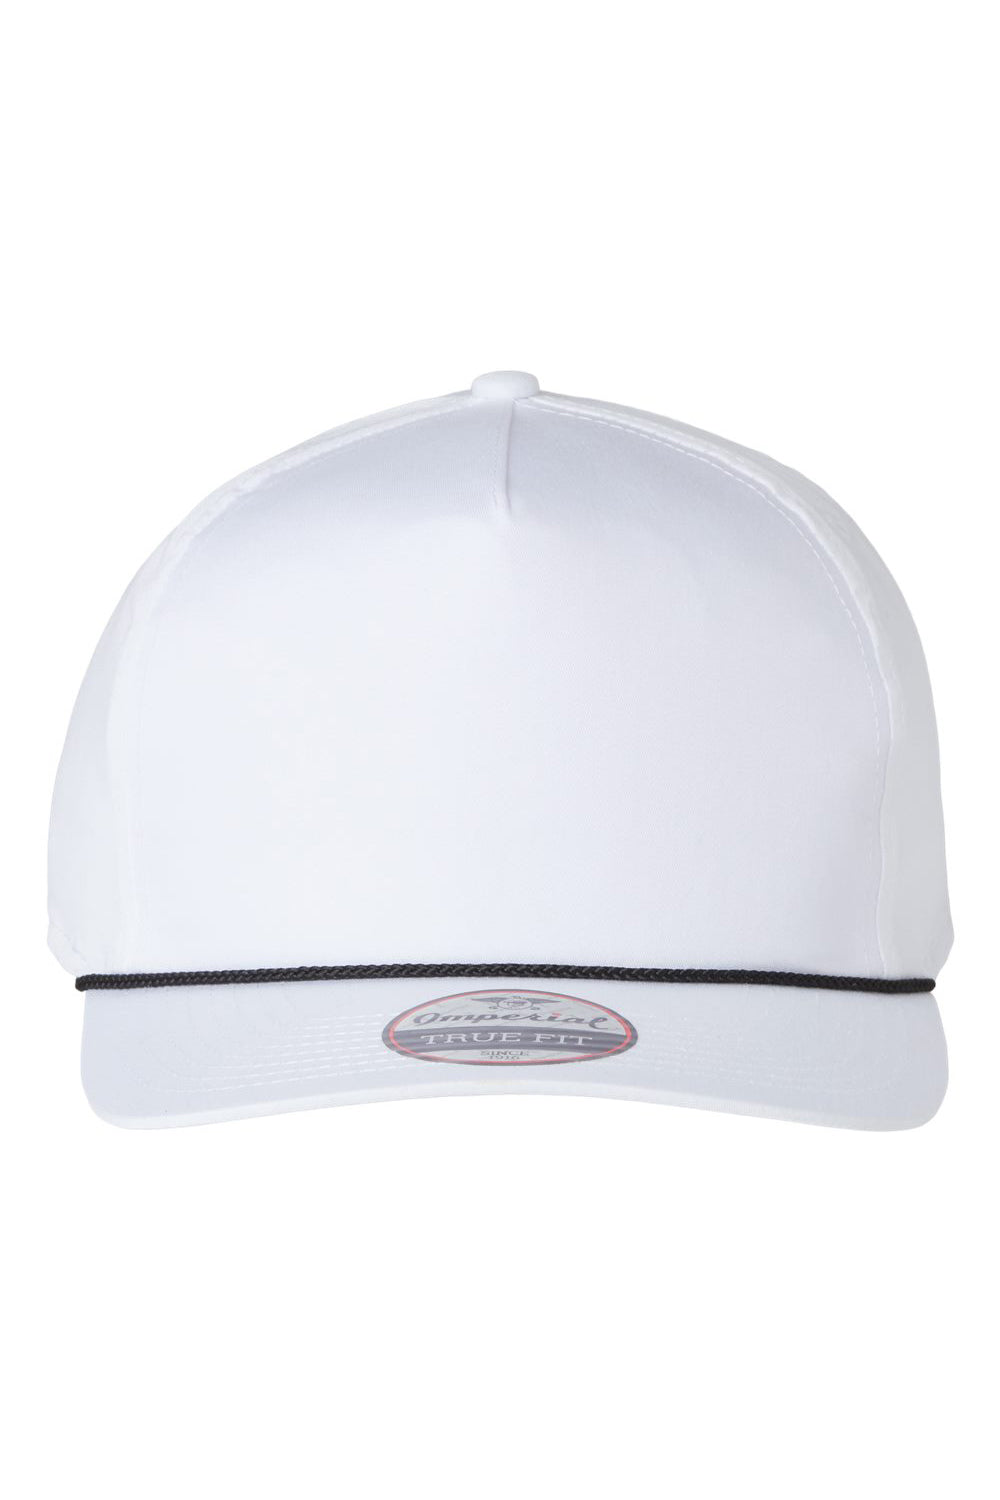 Imperial 5056 Mens The Barnes Hat White/Black Flat Front